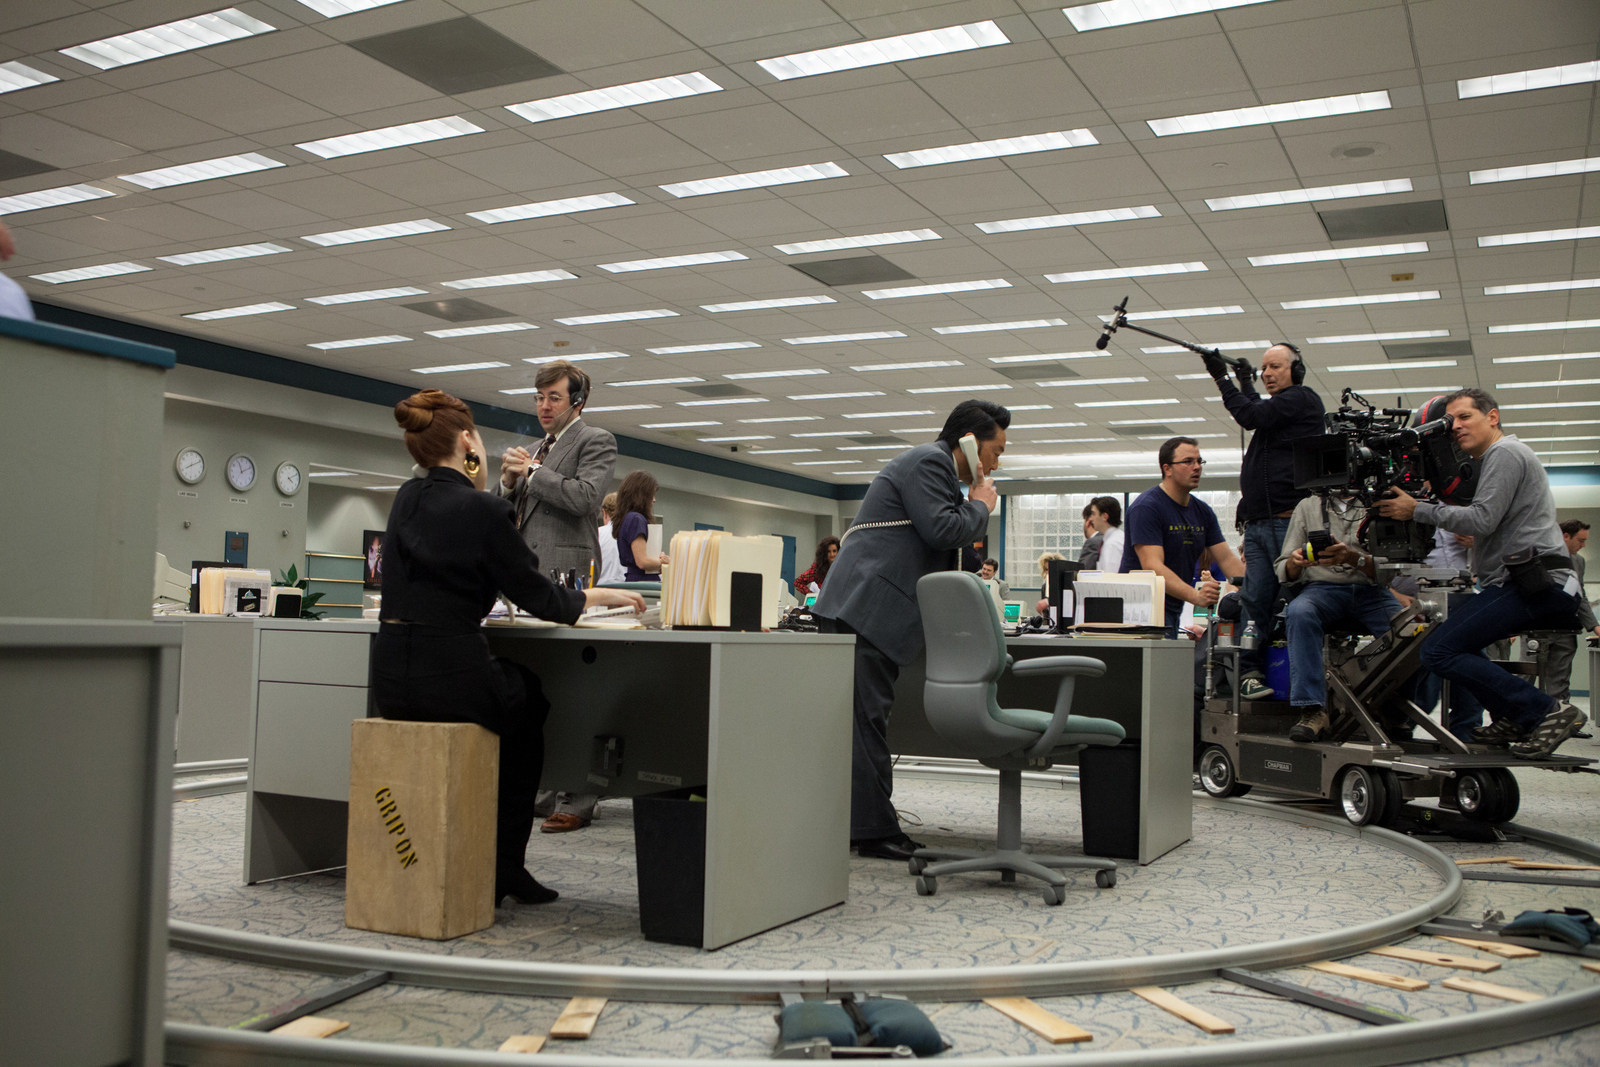 The tracks to create the fast paced 360 degree scene for The Wolf of Wall Street.